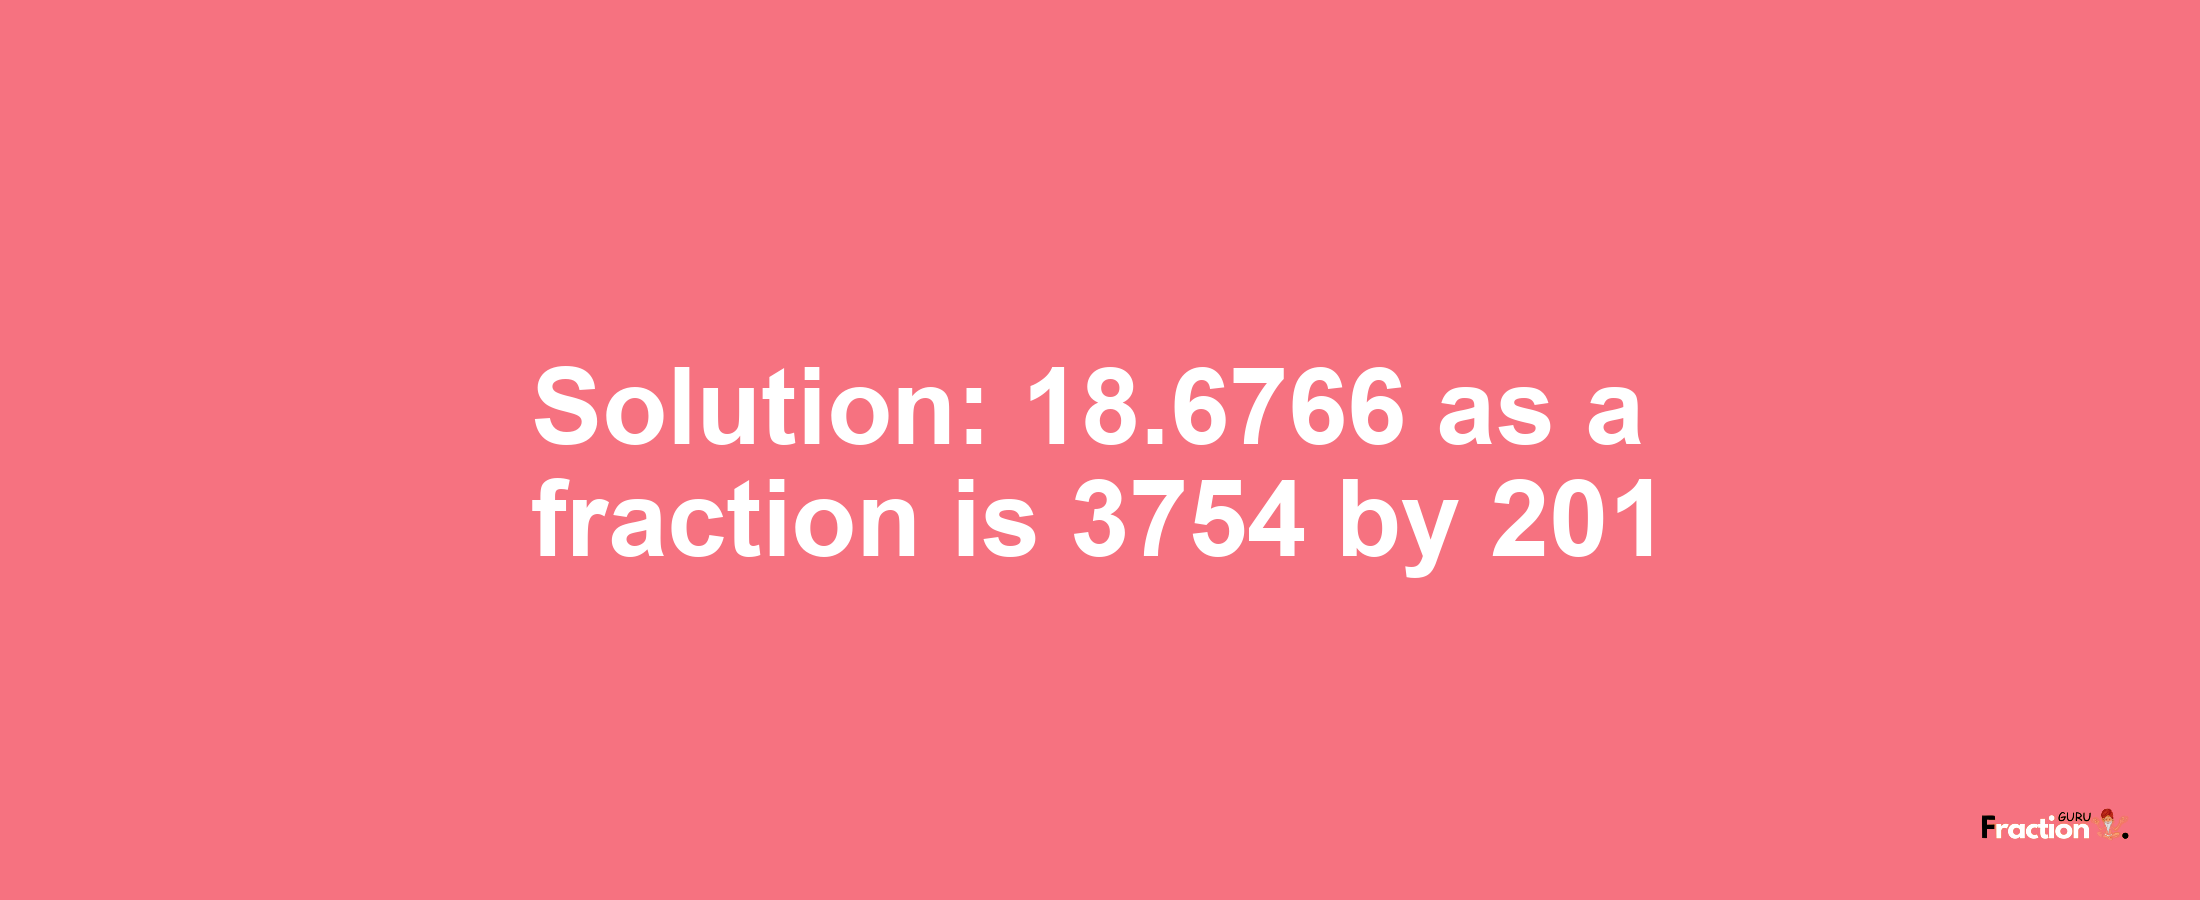 Solution:18.6766 as a fraction is 3754/201